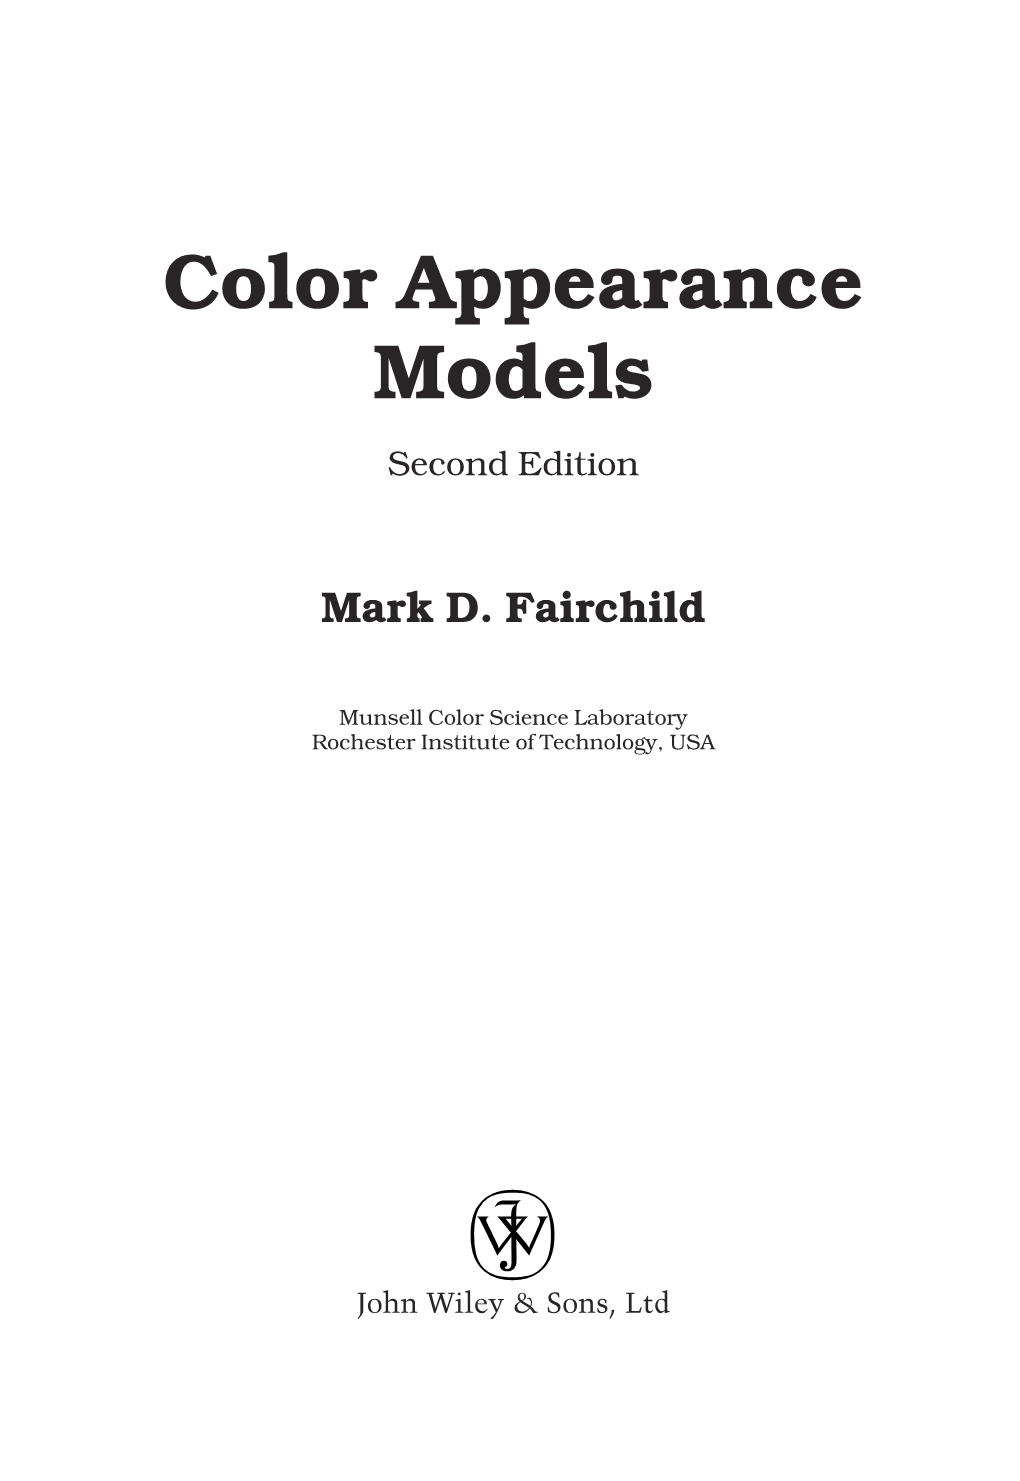 Color Appearance Models Second Edition